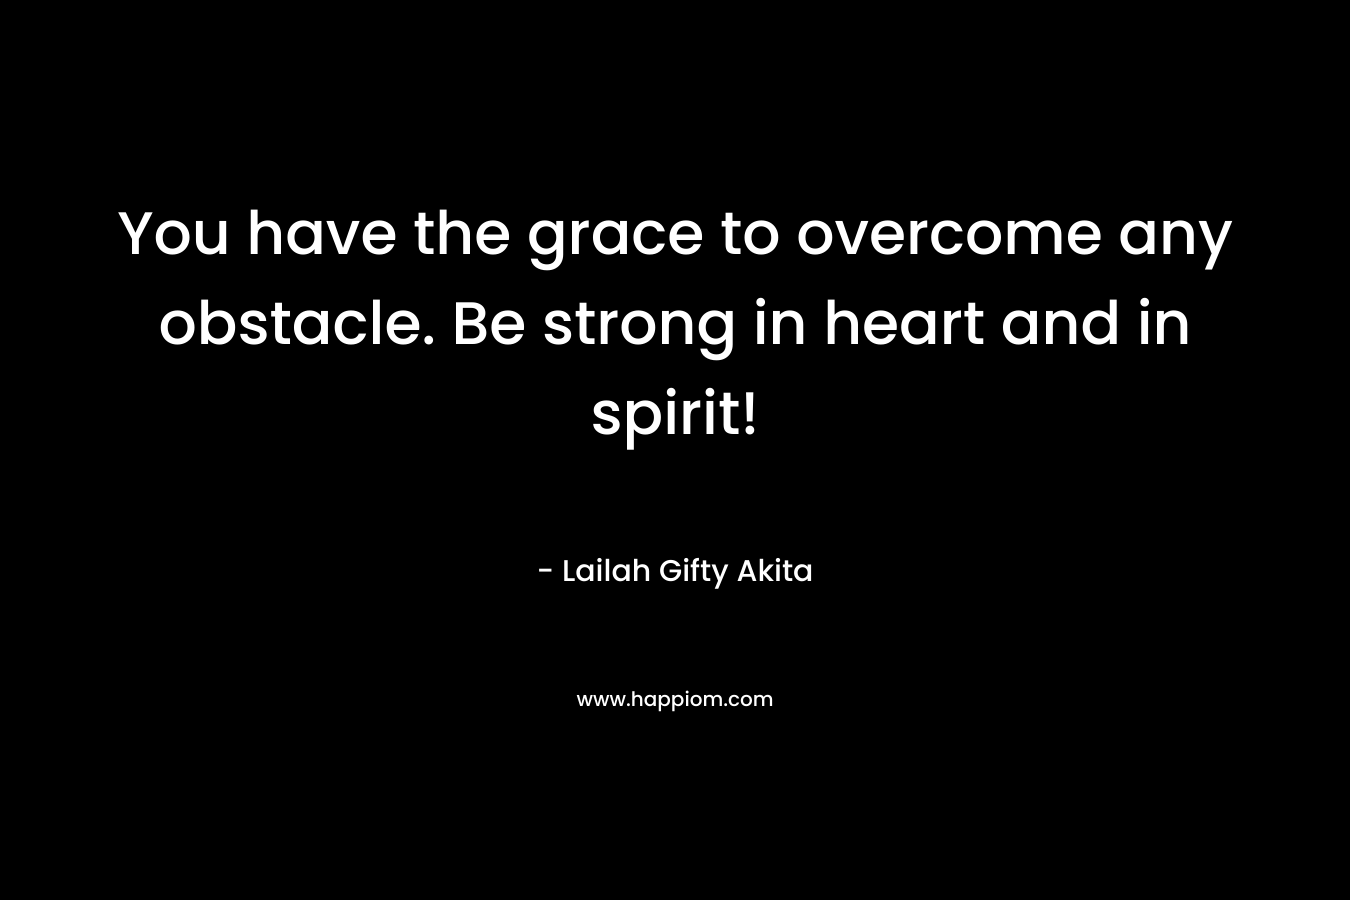 You have the grace to overcome any obstacle. Be strong in heart and in spirit!